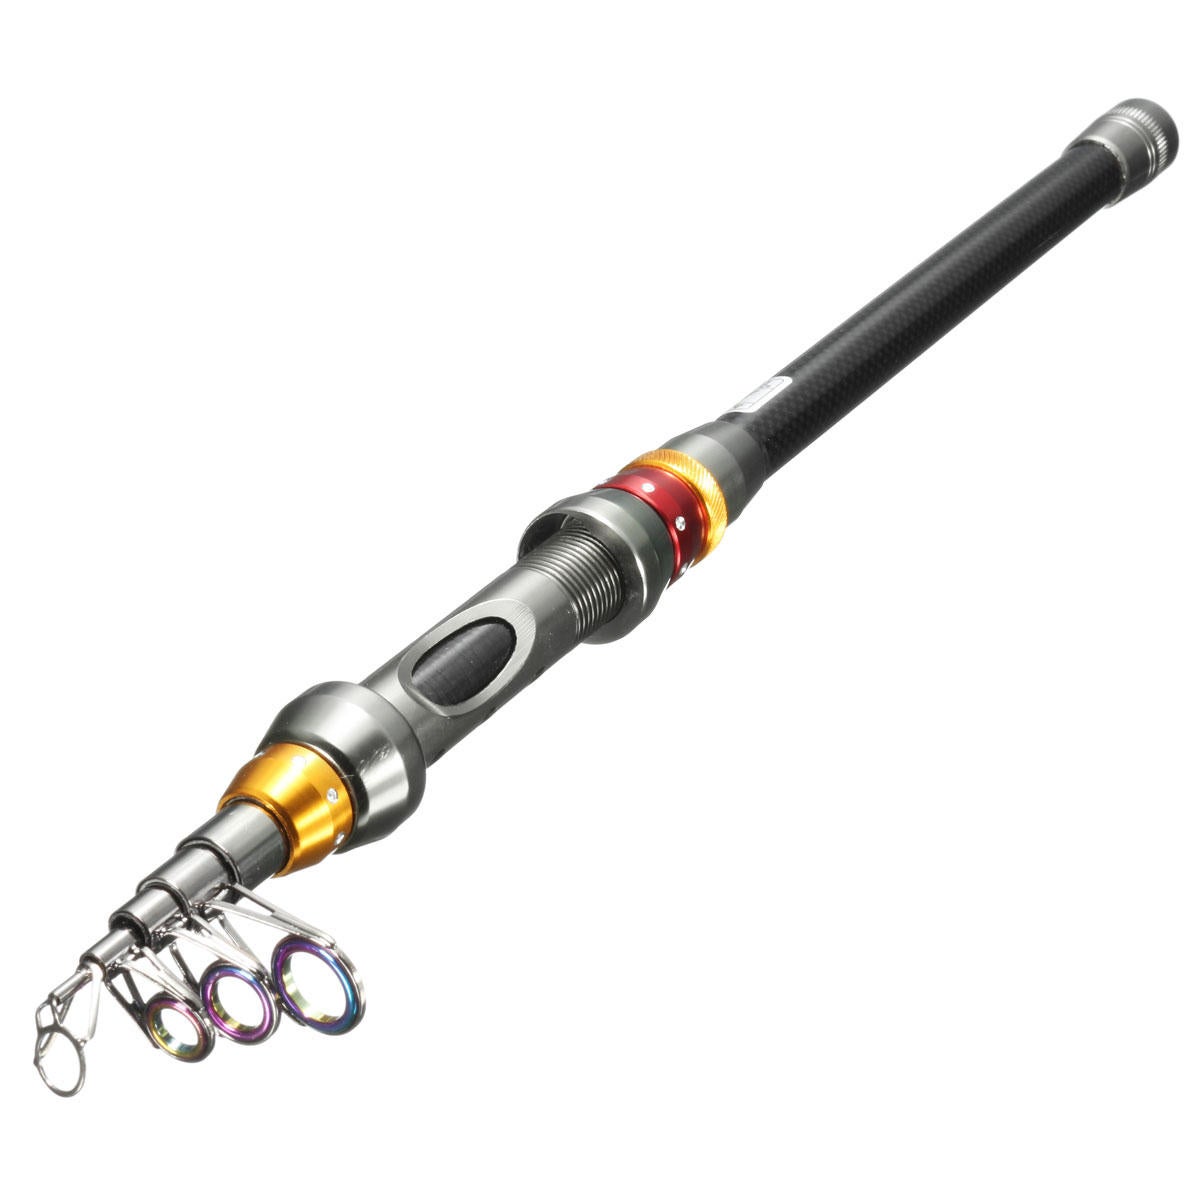 3.6M ZANLURE Strong Carbon Fiber Ultralight Telescopic Outdoor Sea Spinning Fishing Pole-